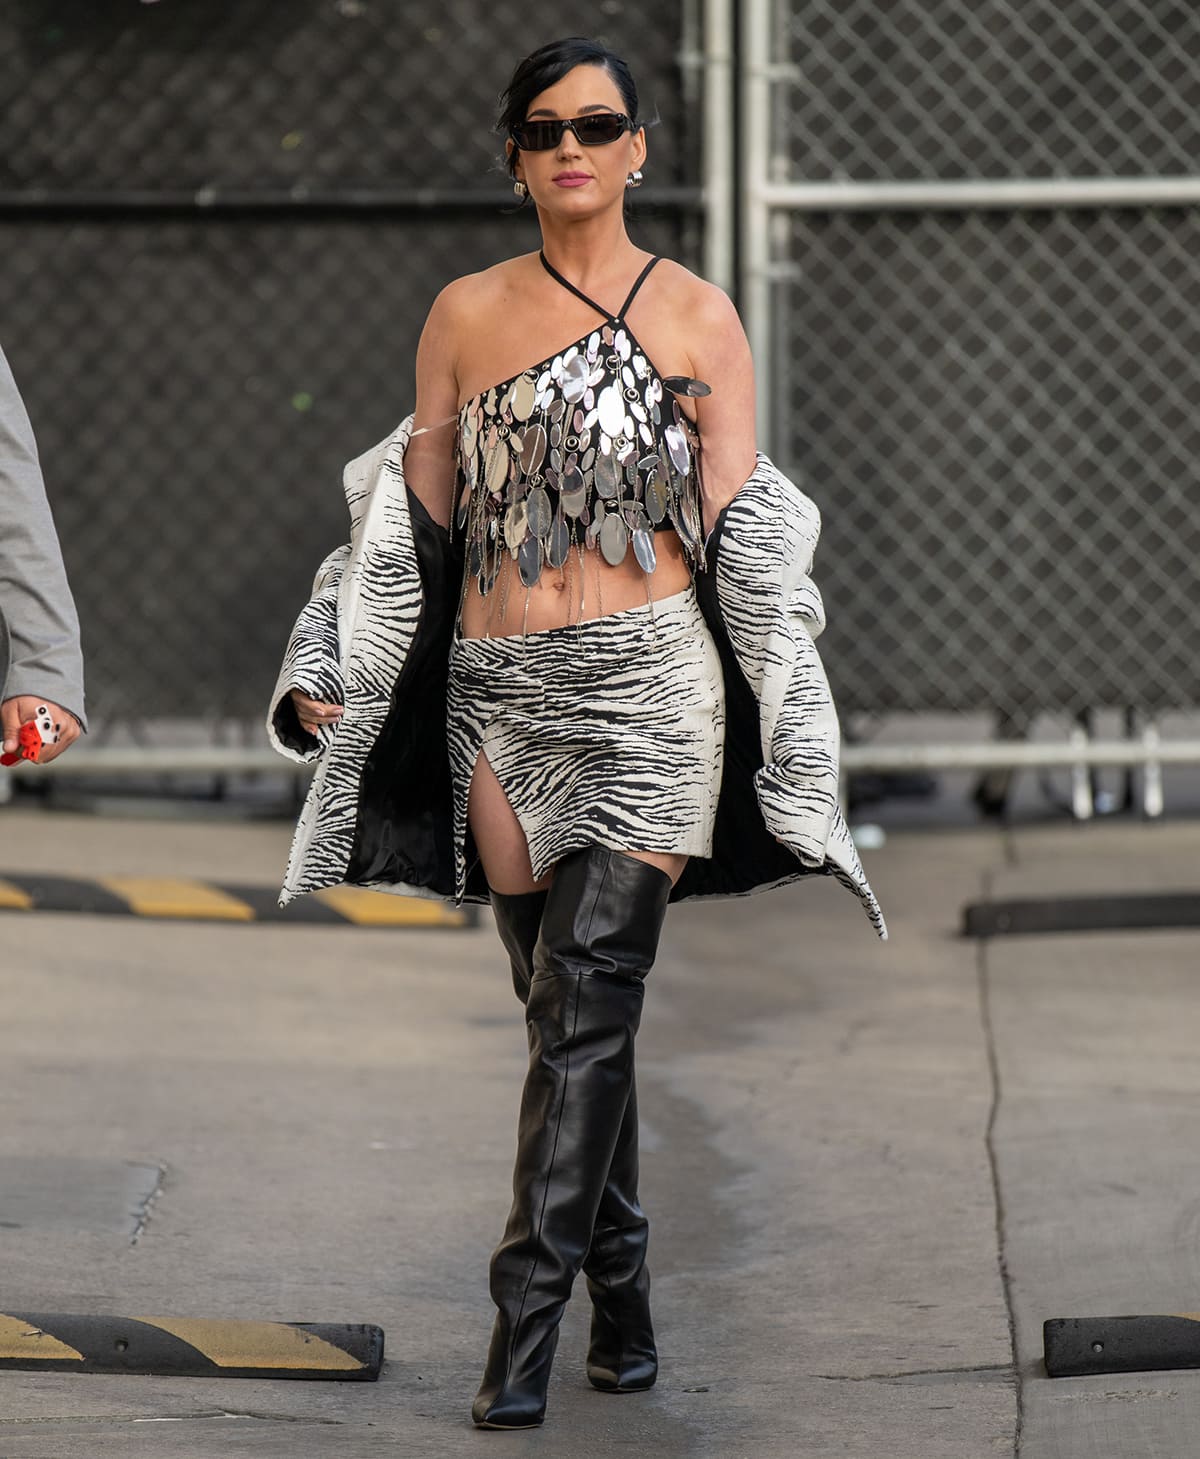 Katy Perry on her way to Jimmy Kimmel Live! studio to promote the 21st season of American Idol on February 16, 2023